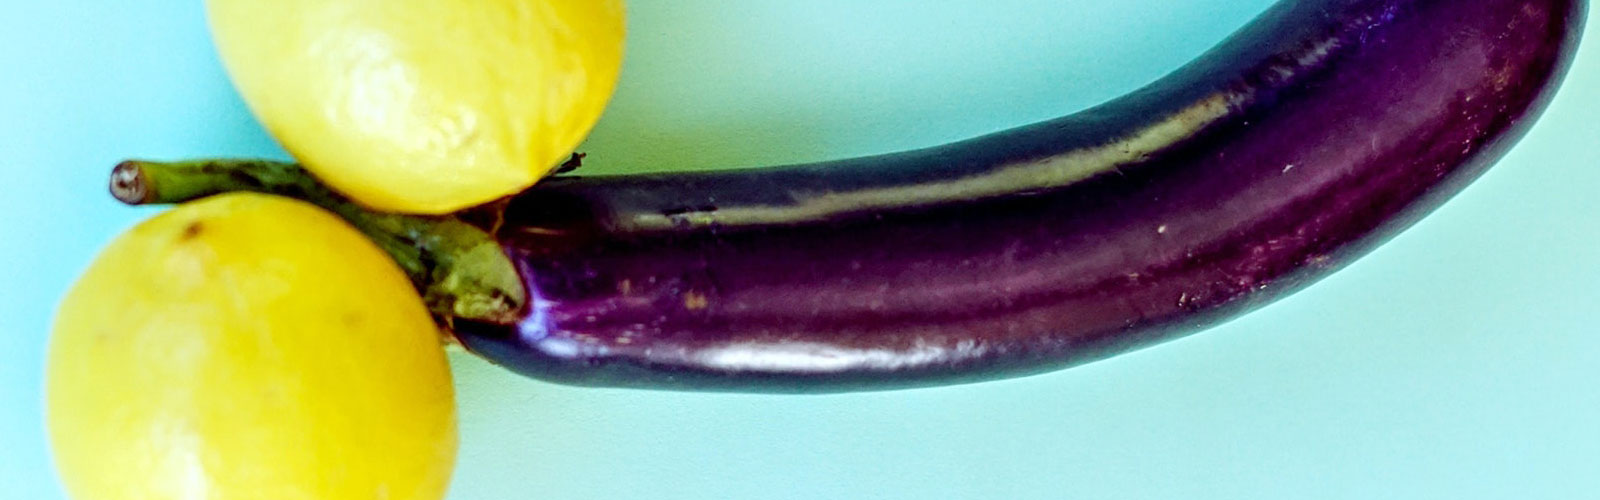 Fruit and vegetables resembling penis